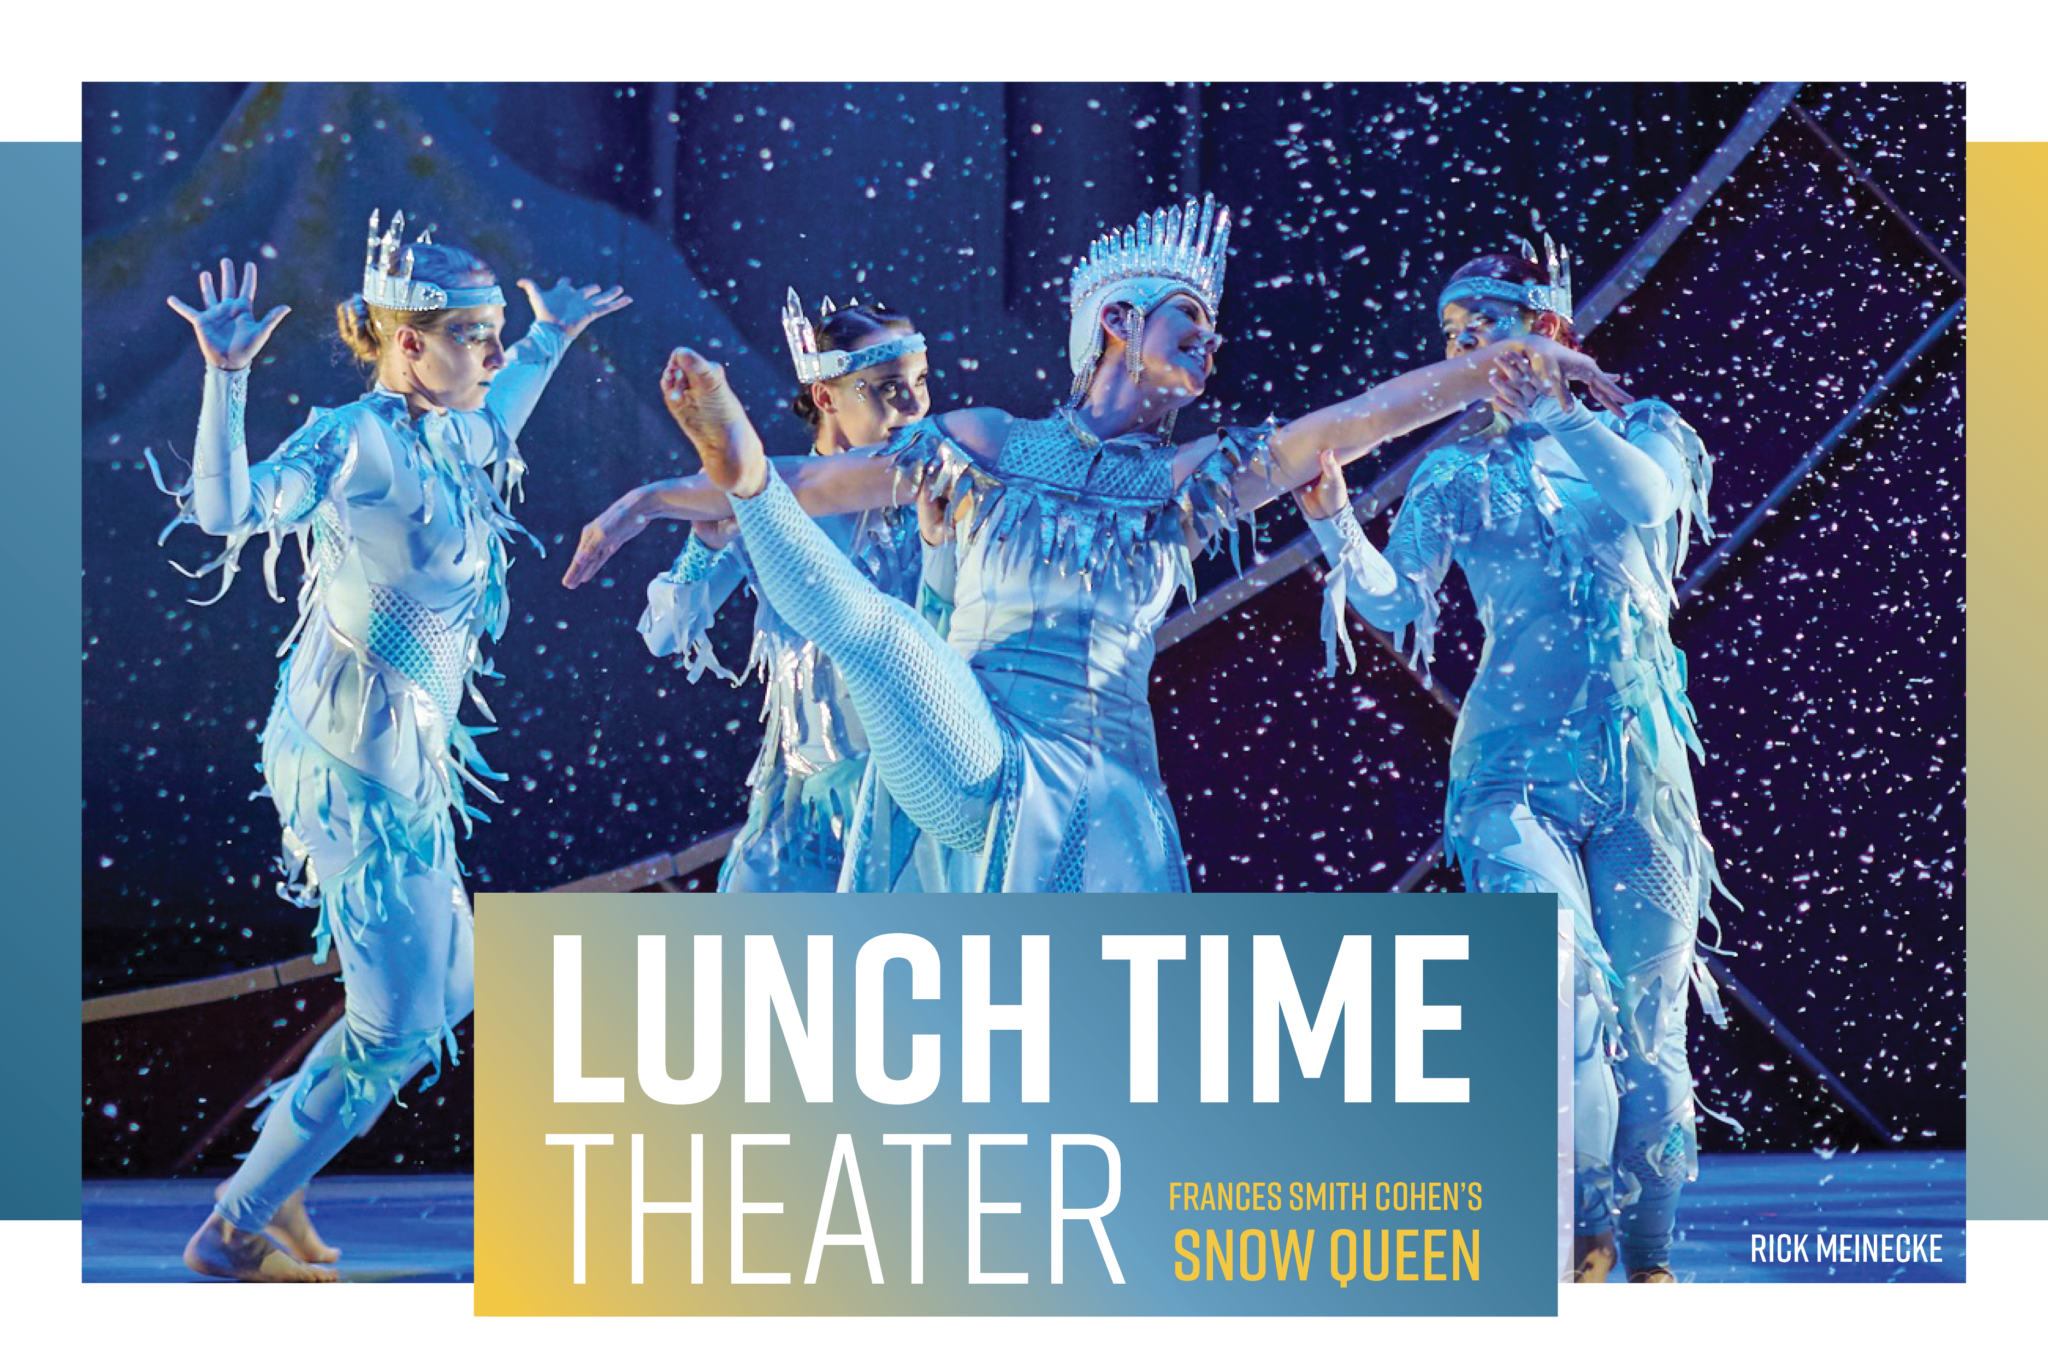 Frances Smith Cohen’s Snow Queen – Lunch Time Theater Poster Image